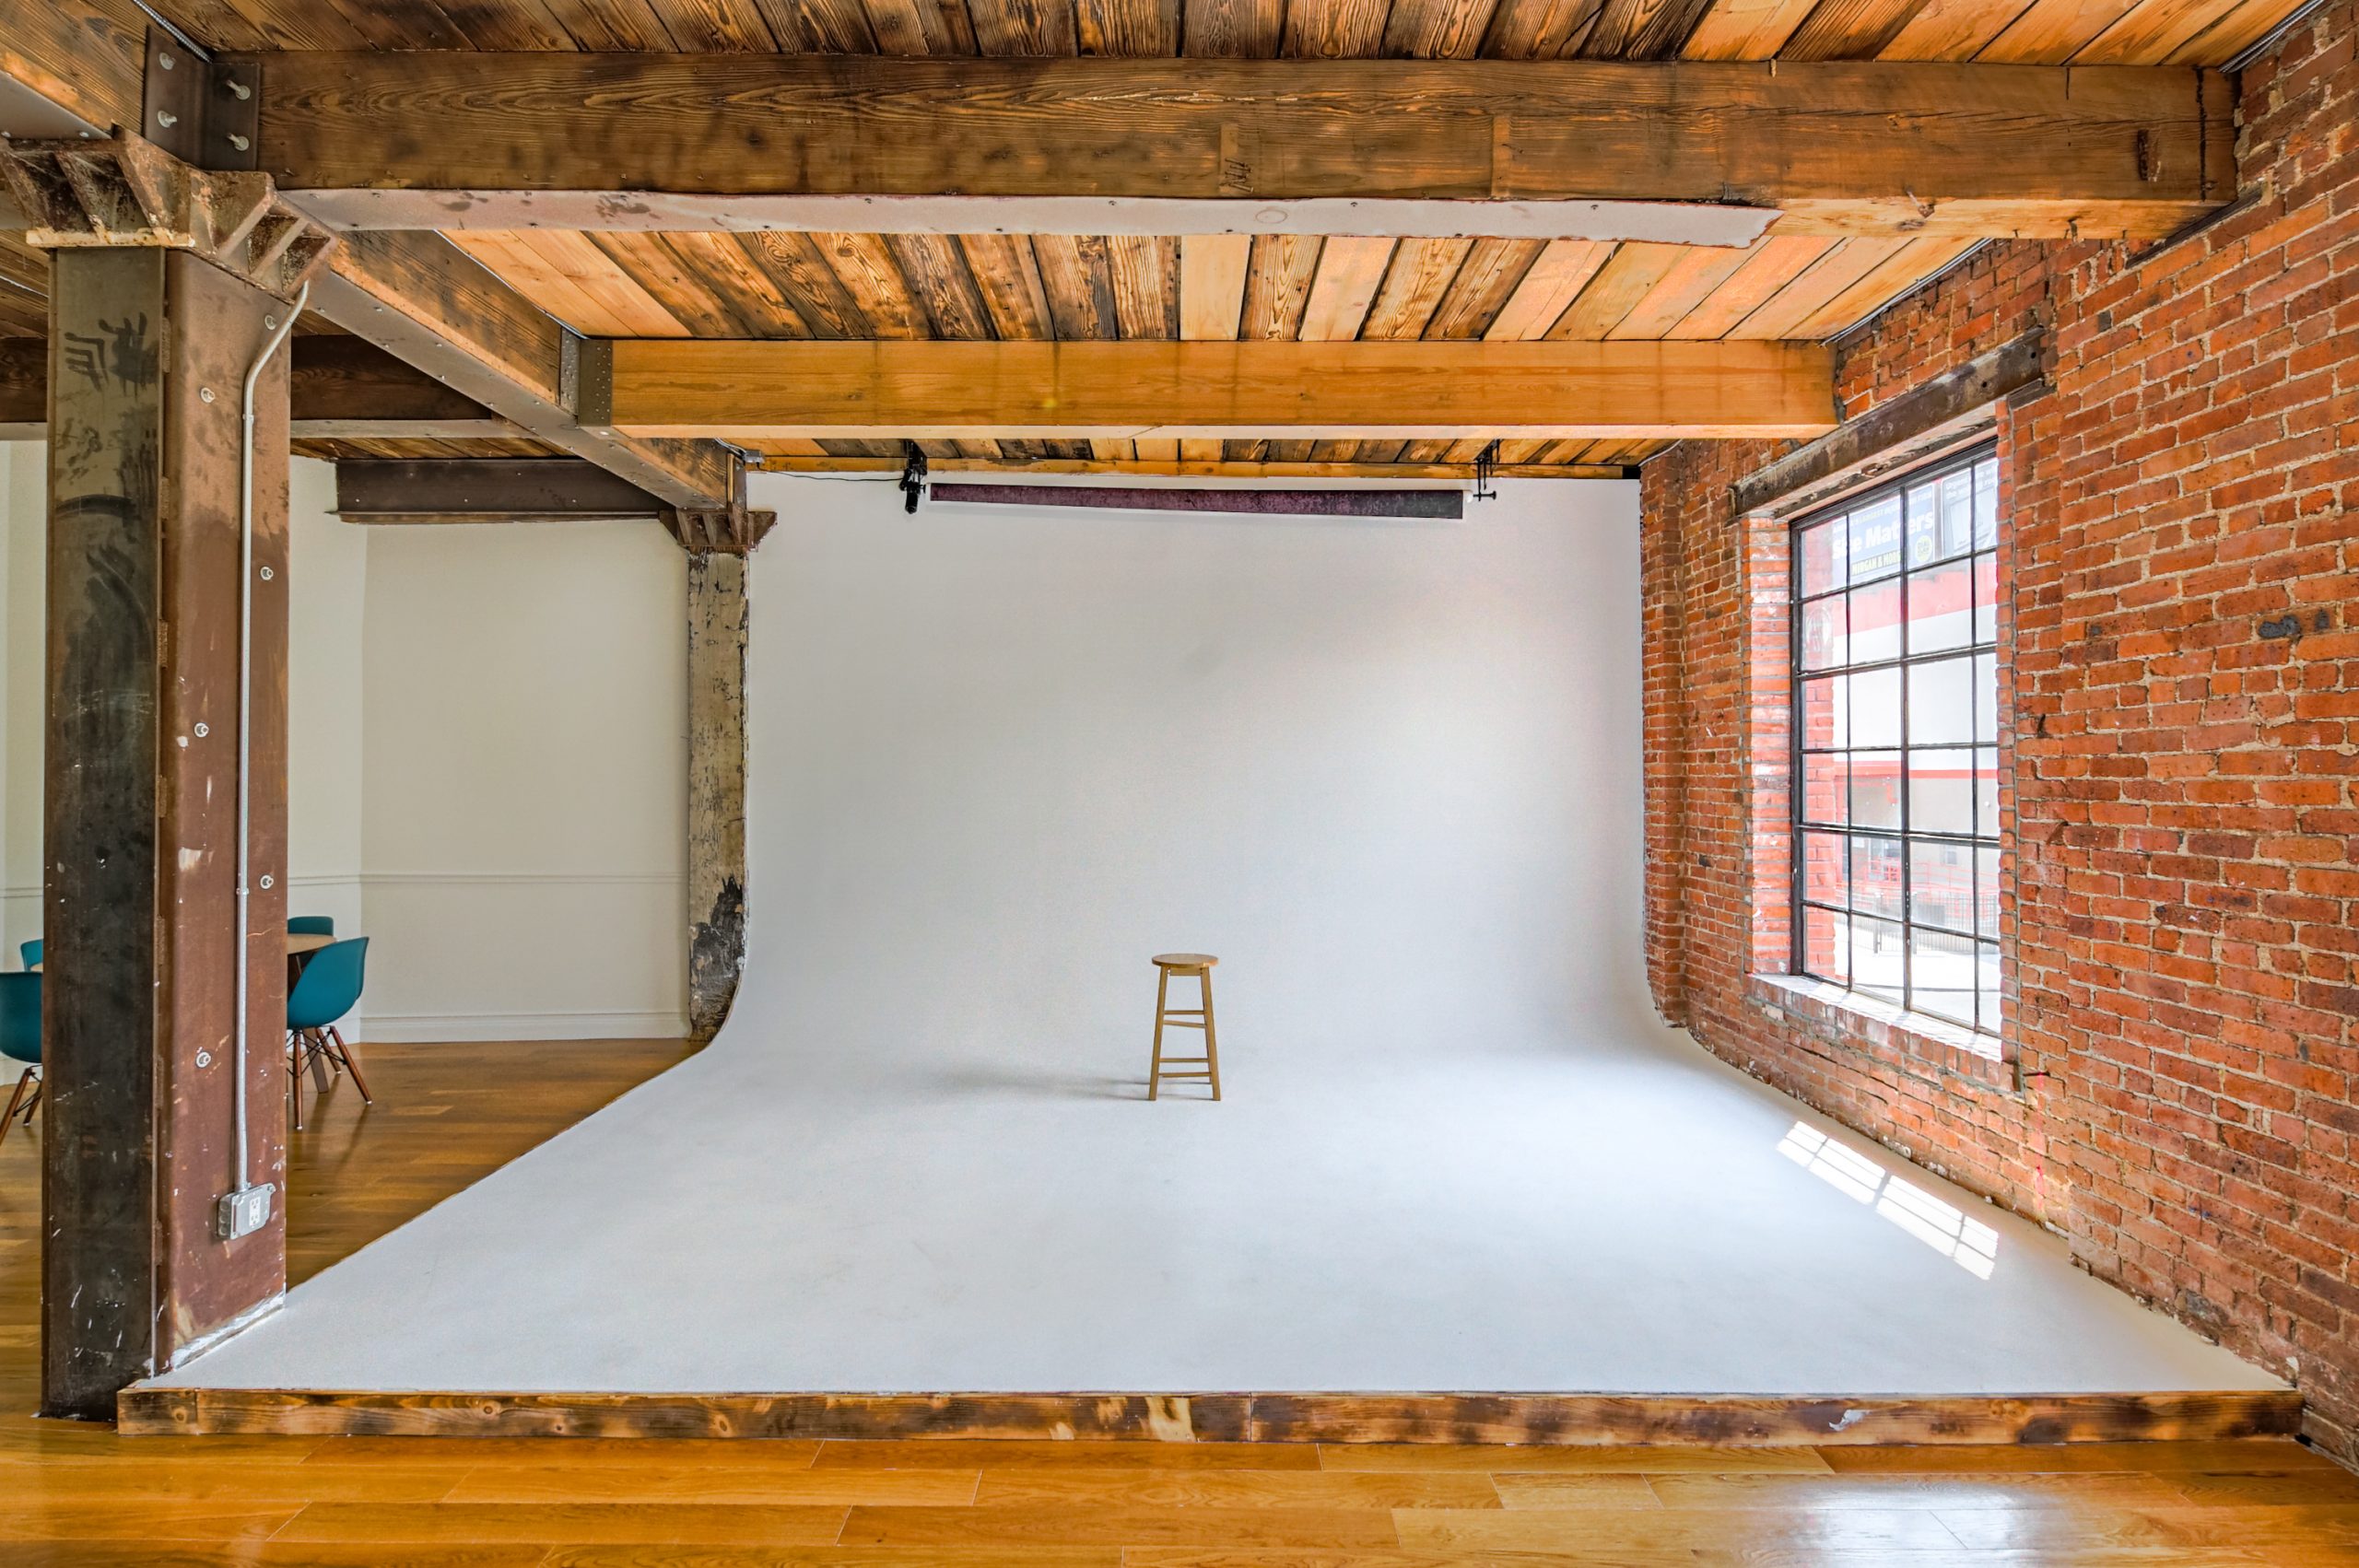 wooden chair in the middle of a white cyclorama in a photo studio